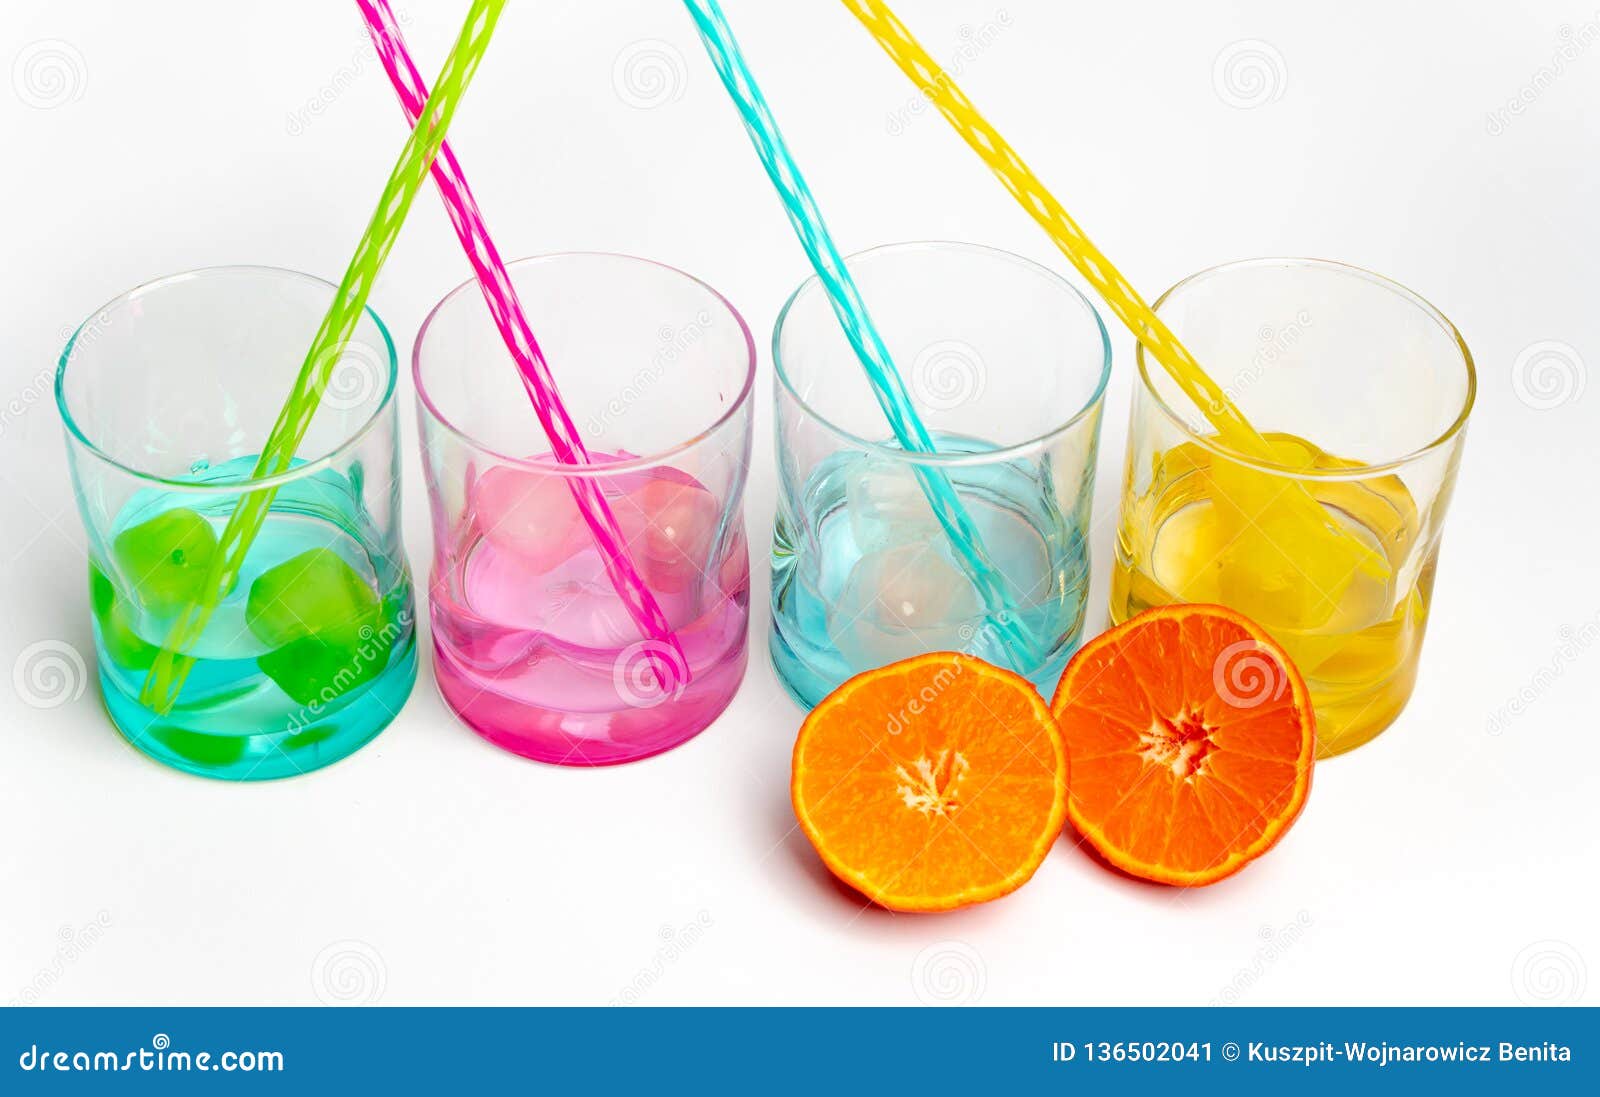 Fresh and Cold Drink for a Hot Day Stock Image - Image of freshness ...